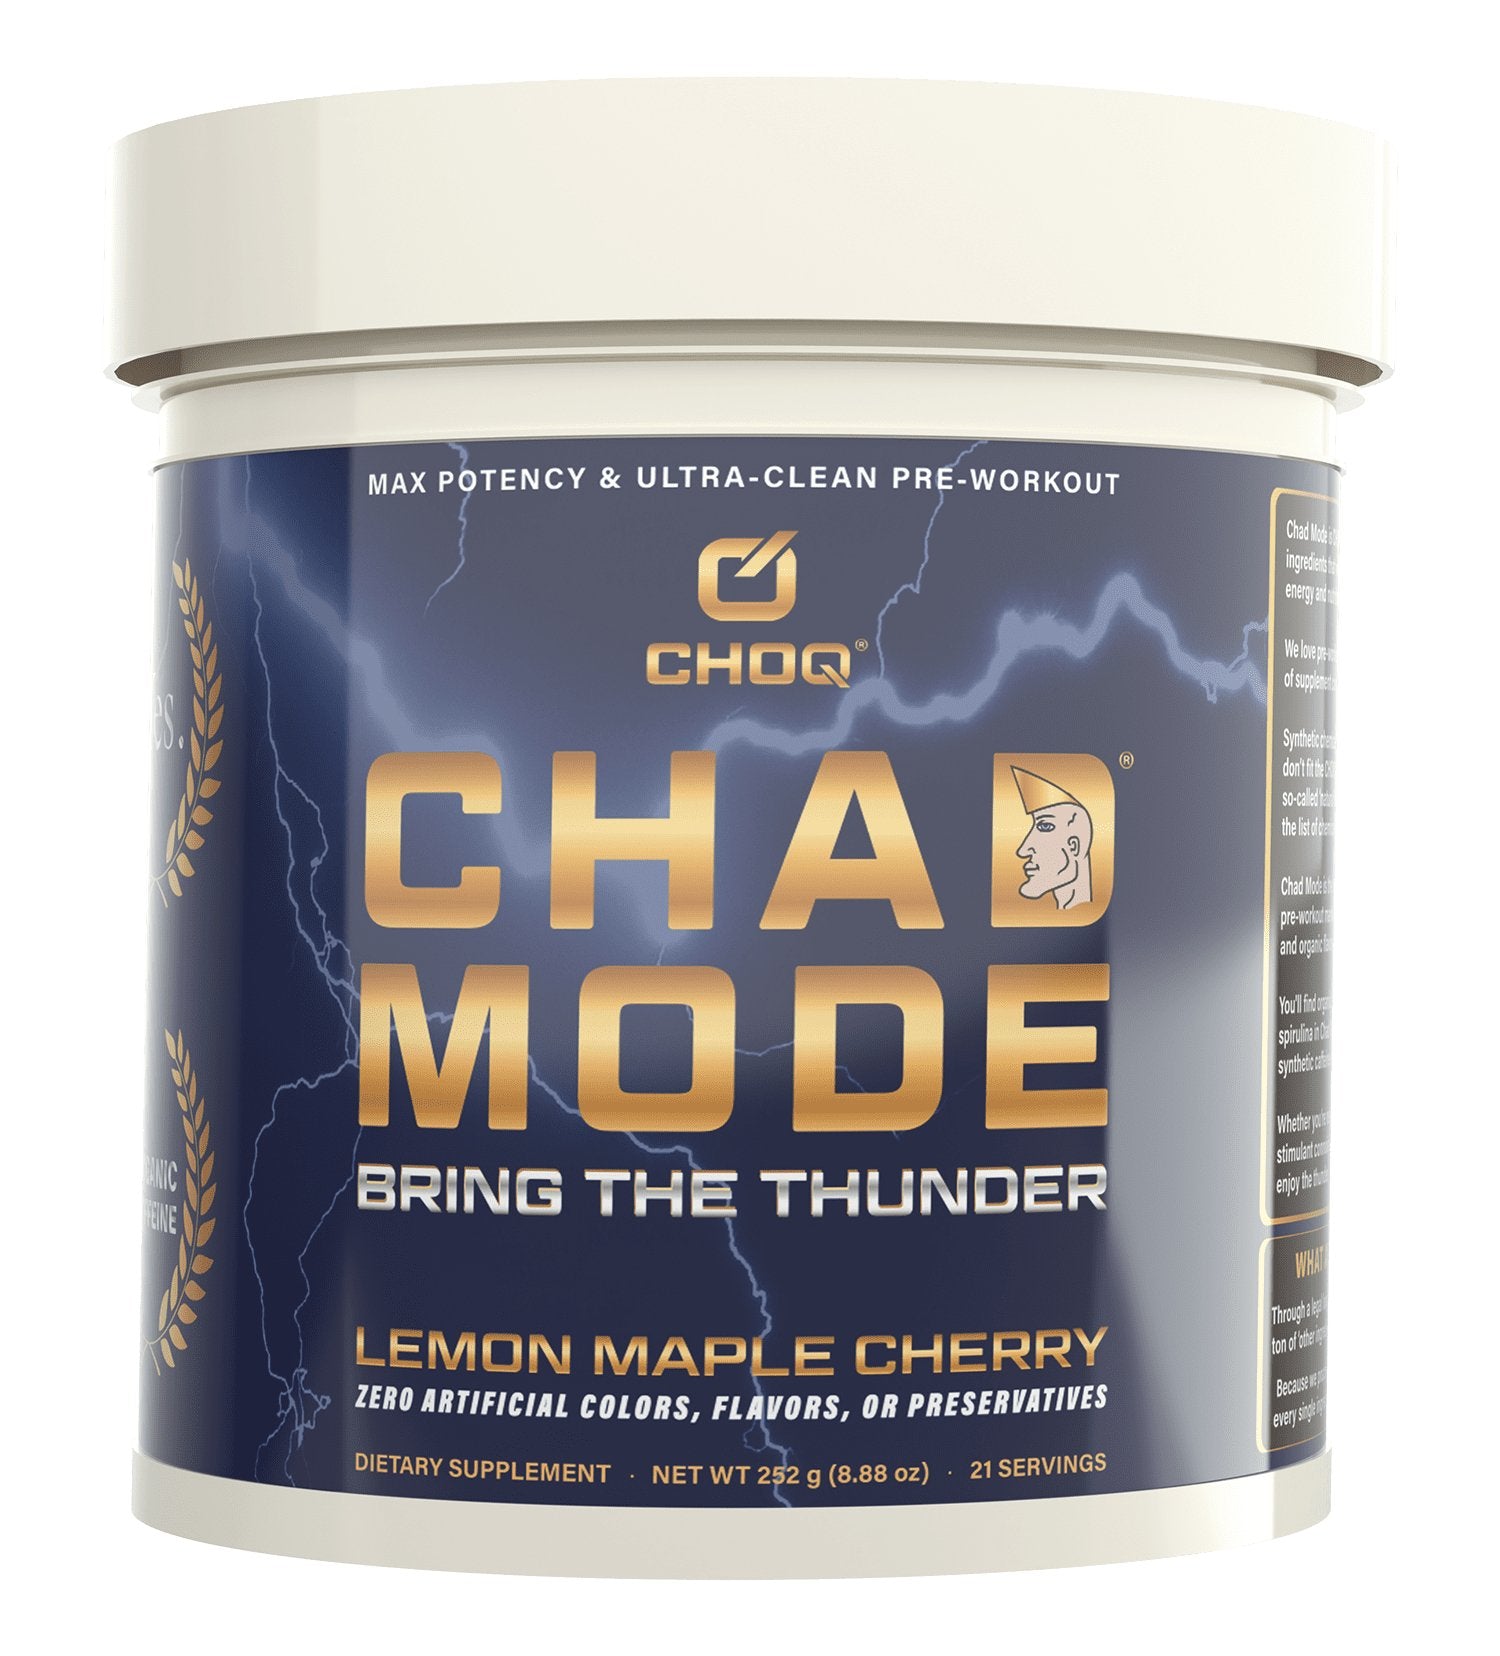 CHOQChad Mode Clean Pre-WorkoutClean Pre-WorkoutRED SUPPS